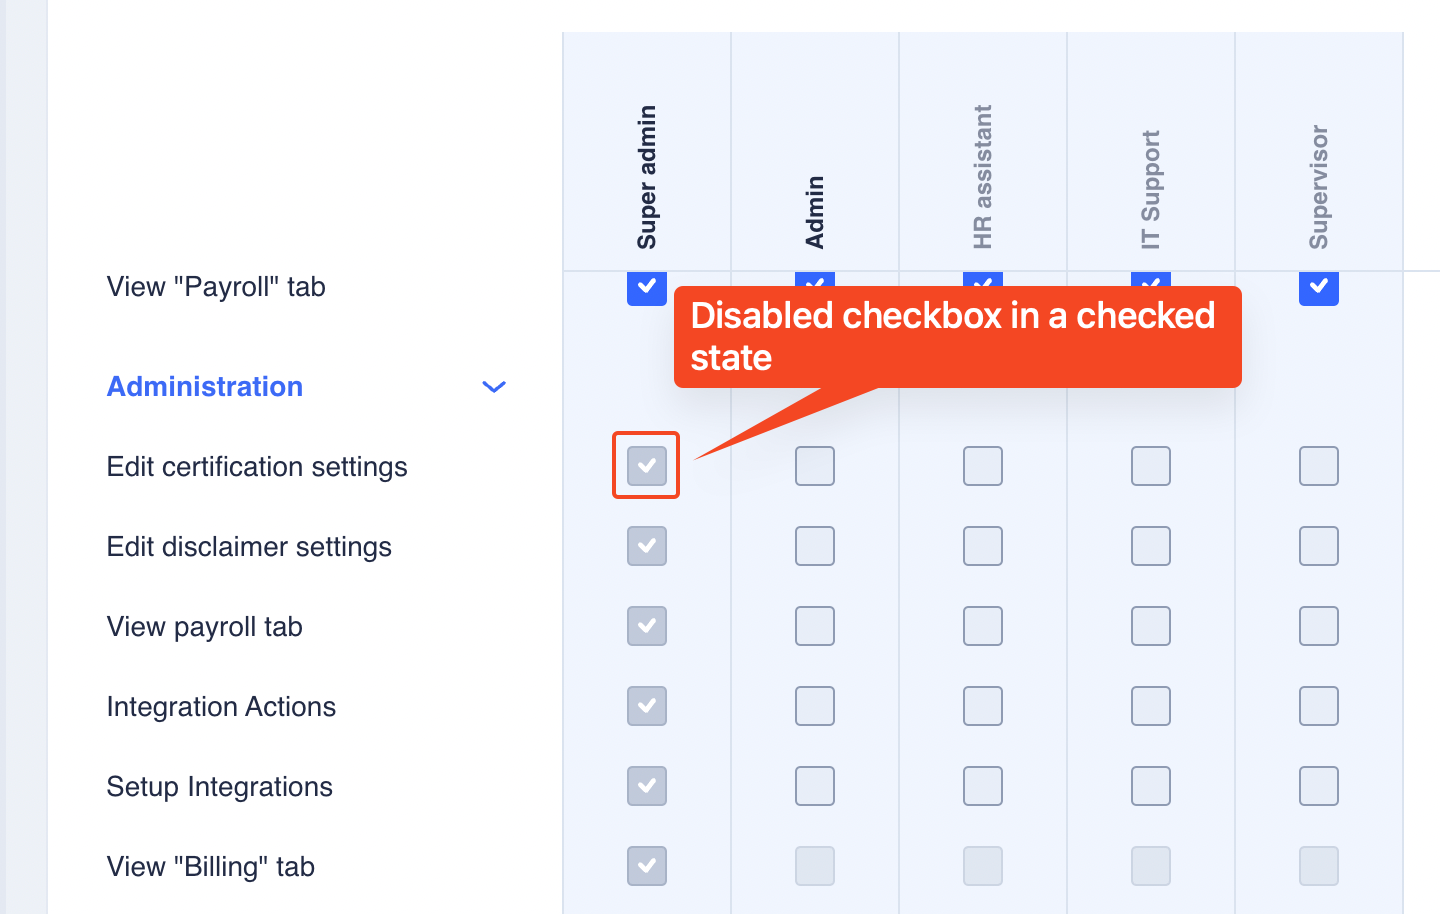 A checked checkbox that cannot be modified